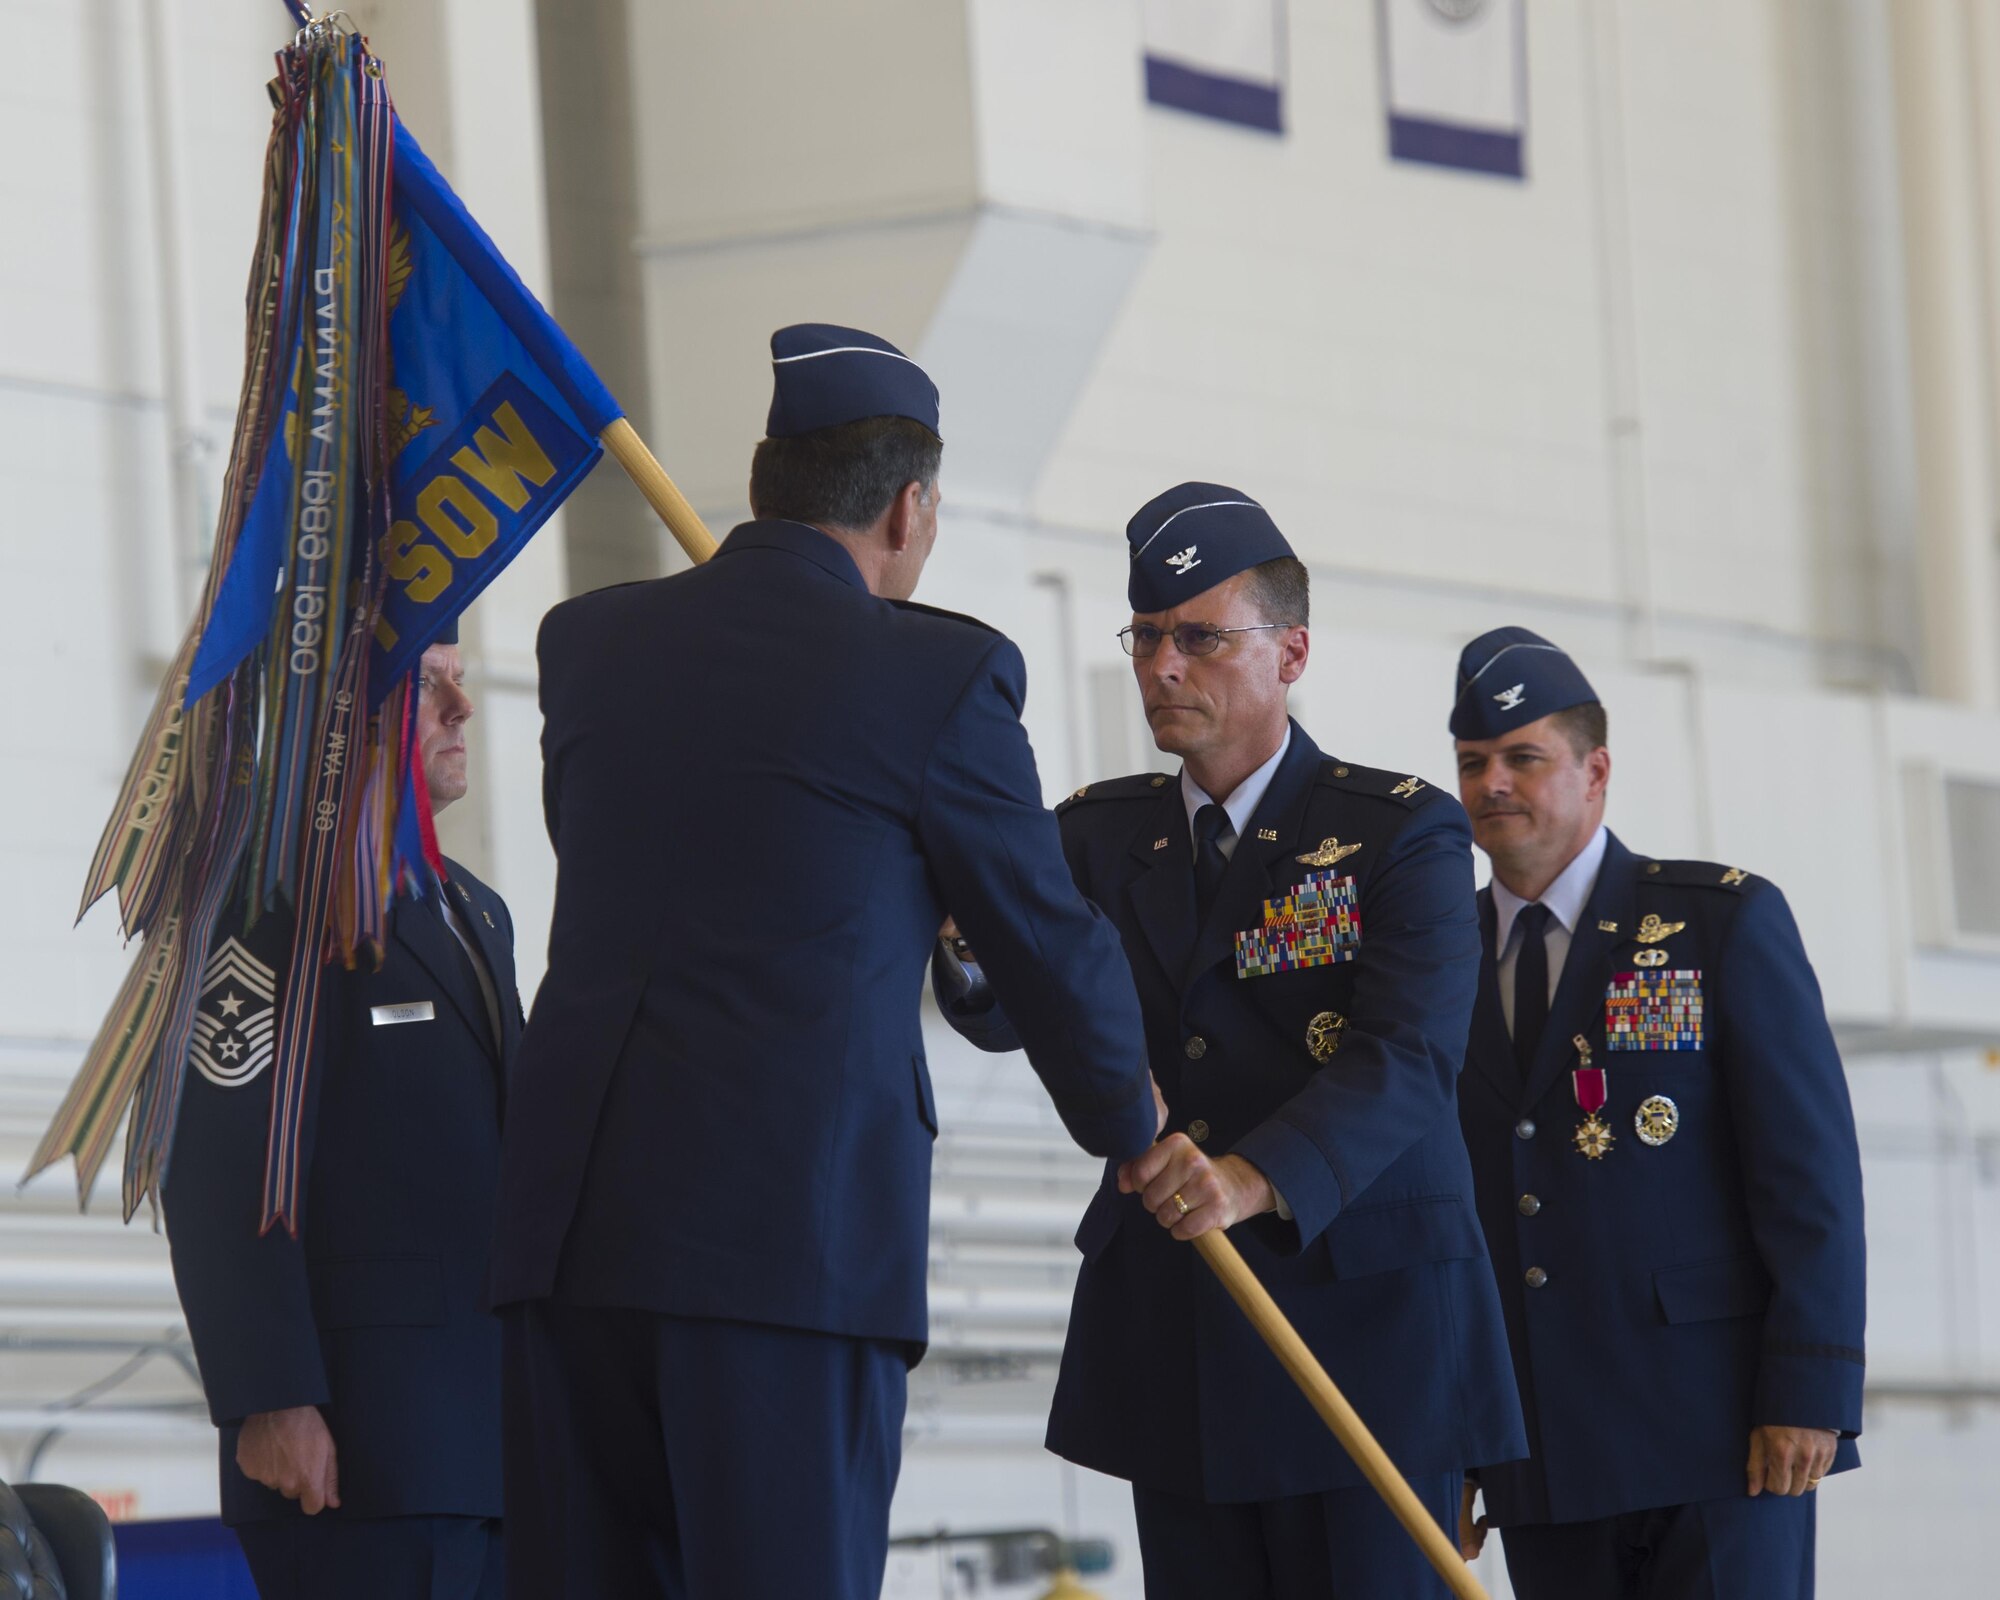 Col. Tom Palenske, commander of the 1st Special Operations Wing, takes the guidon from Lt. Gen. Brad Heithold, commander of Air Force Special Operations Command, to assume command of the 1st SOW during a change of command ceremony at Hurlburt Field, Fla., June 10, 2016. Upon taking command of the 1st SOW, Palenske will be responsible for preparing Air Force special operations forces for missions worldwide in support of Army, Navy, Marine and allied special operations forces and USAF counterparts. (U.S. Air Force photo by Airman 1st Class Kai White)